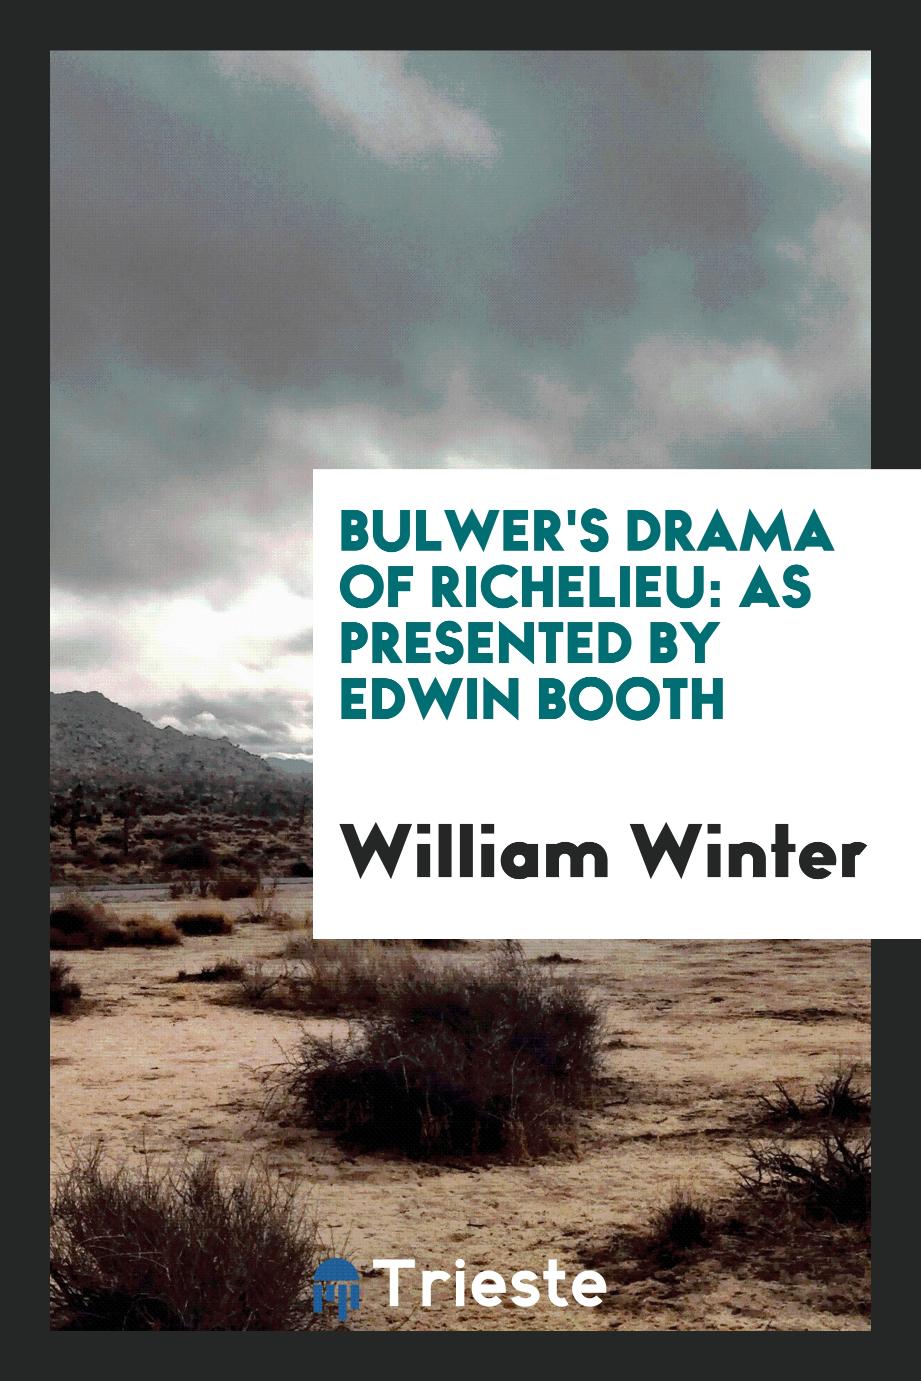 Bulwer's Drama of Richelieu: As Presented by Edwin Booth